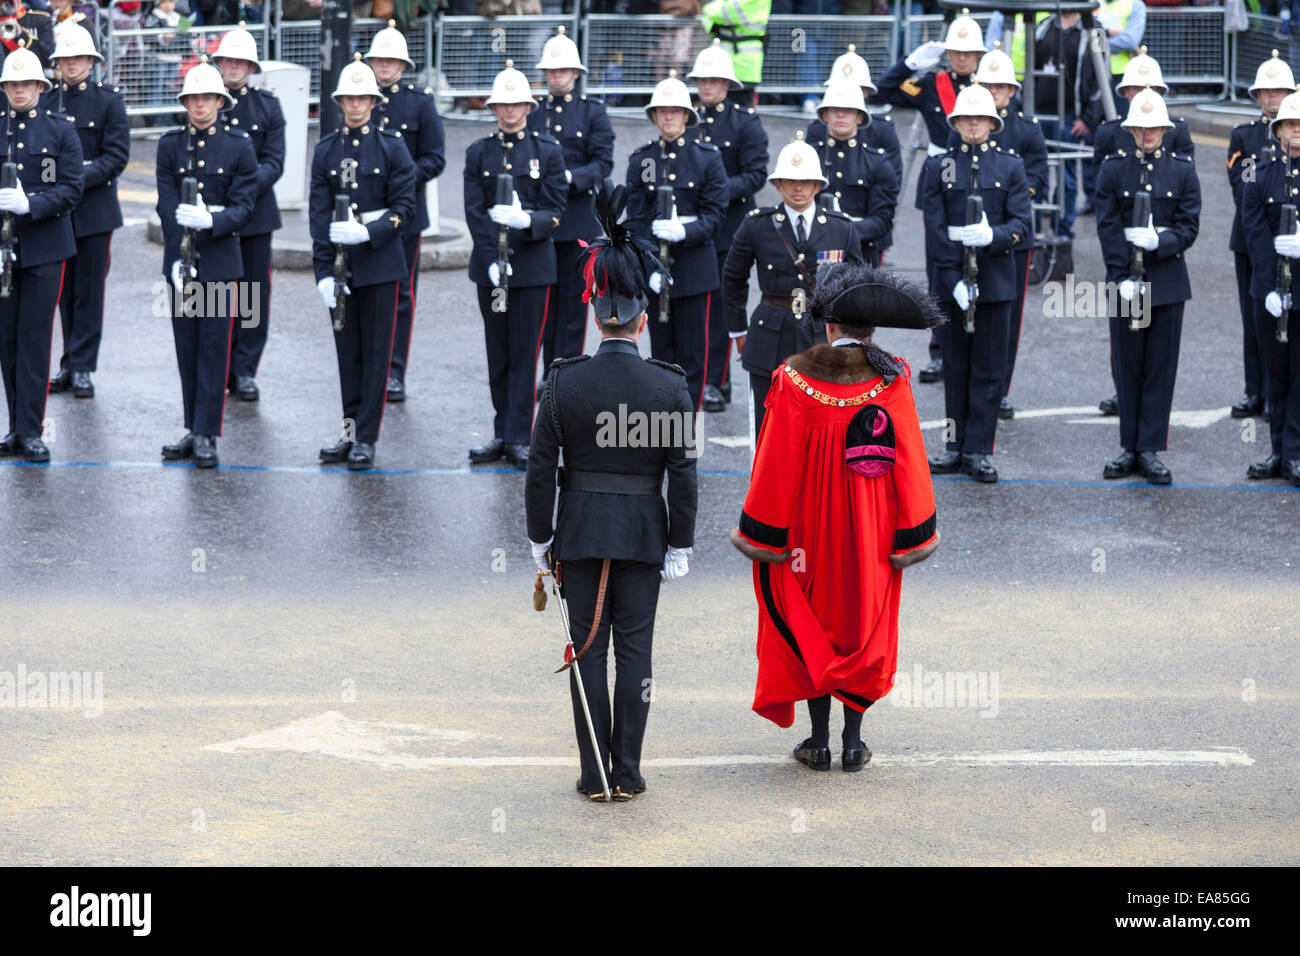 8th November 2014, Lord Mayor's Show, City of London, London, UK. The new Lord Mayor, Alan Yarrow, greets Her Majesty's Royal Marines at the start of the procession near Mansion House. The Lord Mayor's Show is the oldest civil procession in the world, it celebrates the start of a one-year term for the new Mayor of the City of London. Stock Photo